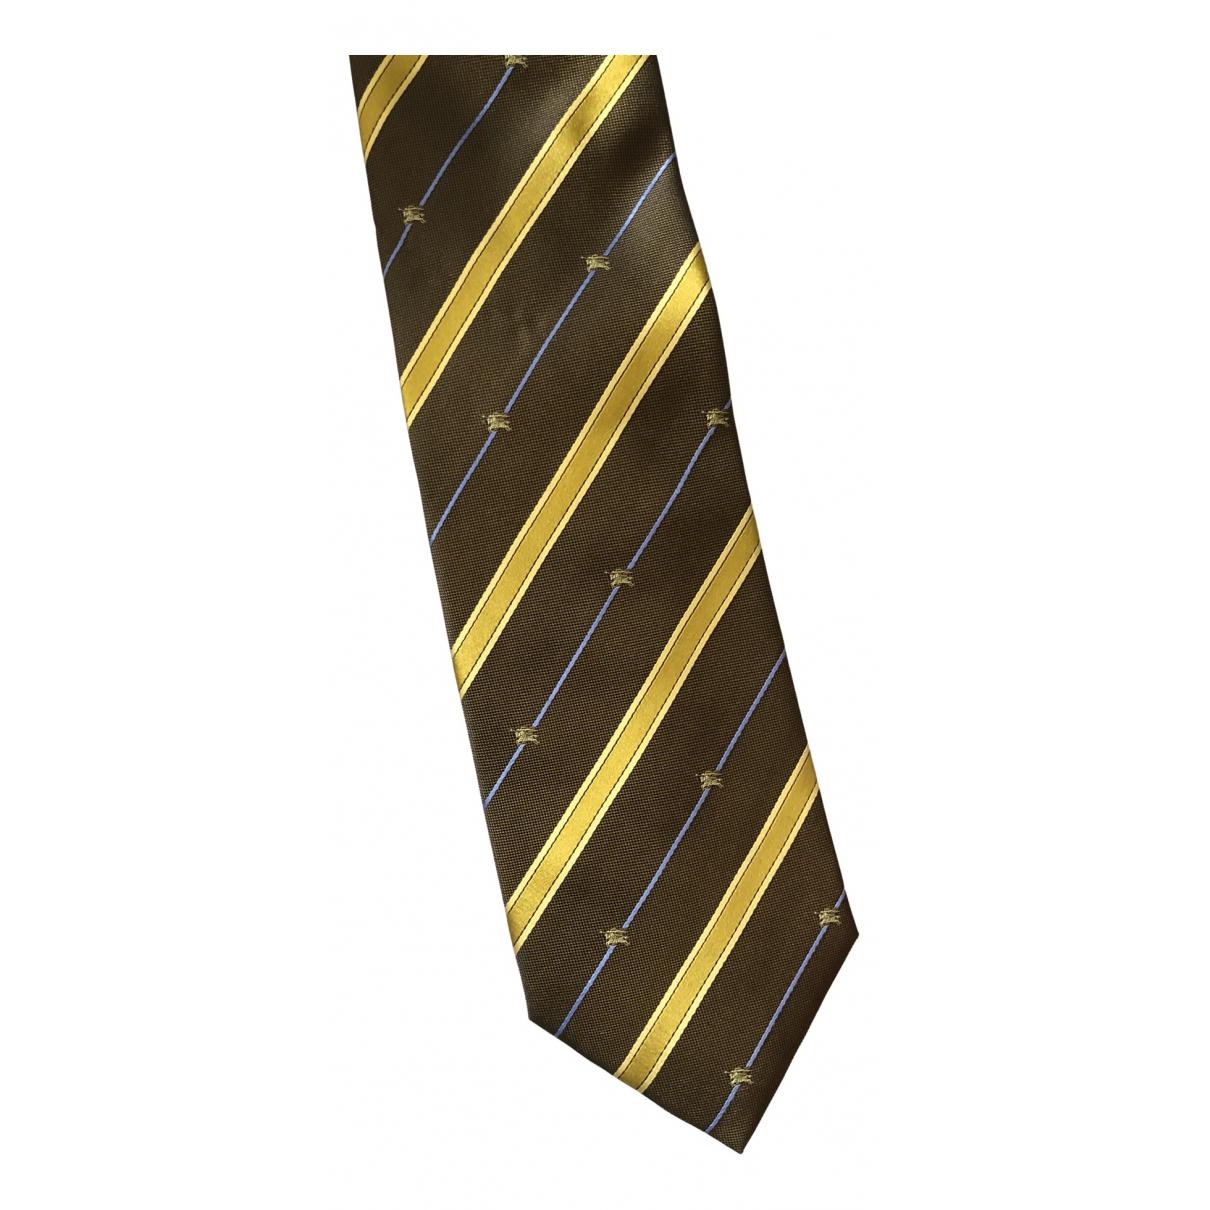 Cashmere tie by BURBERRY